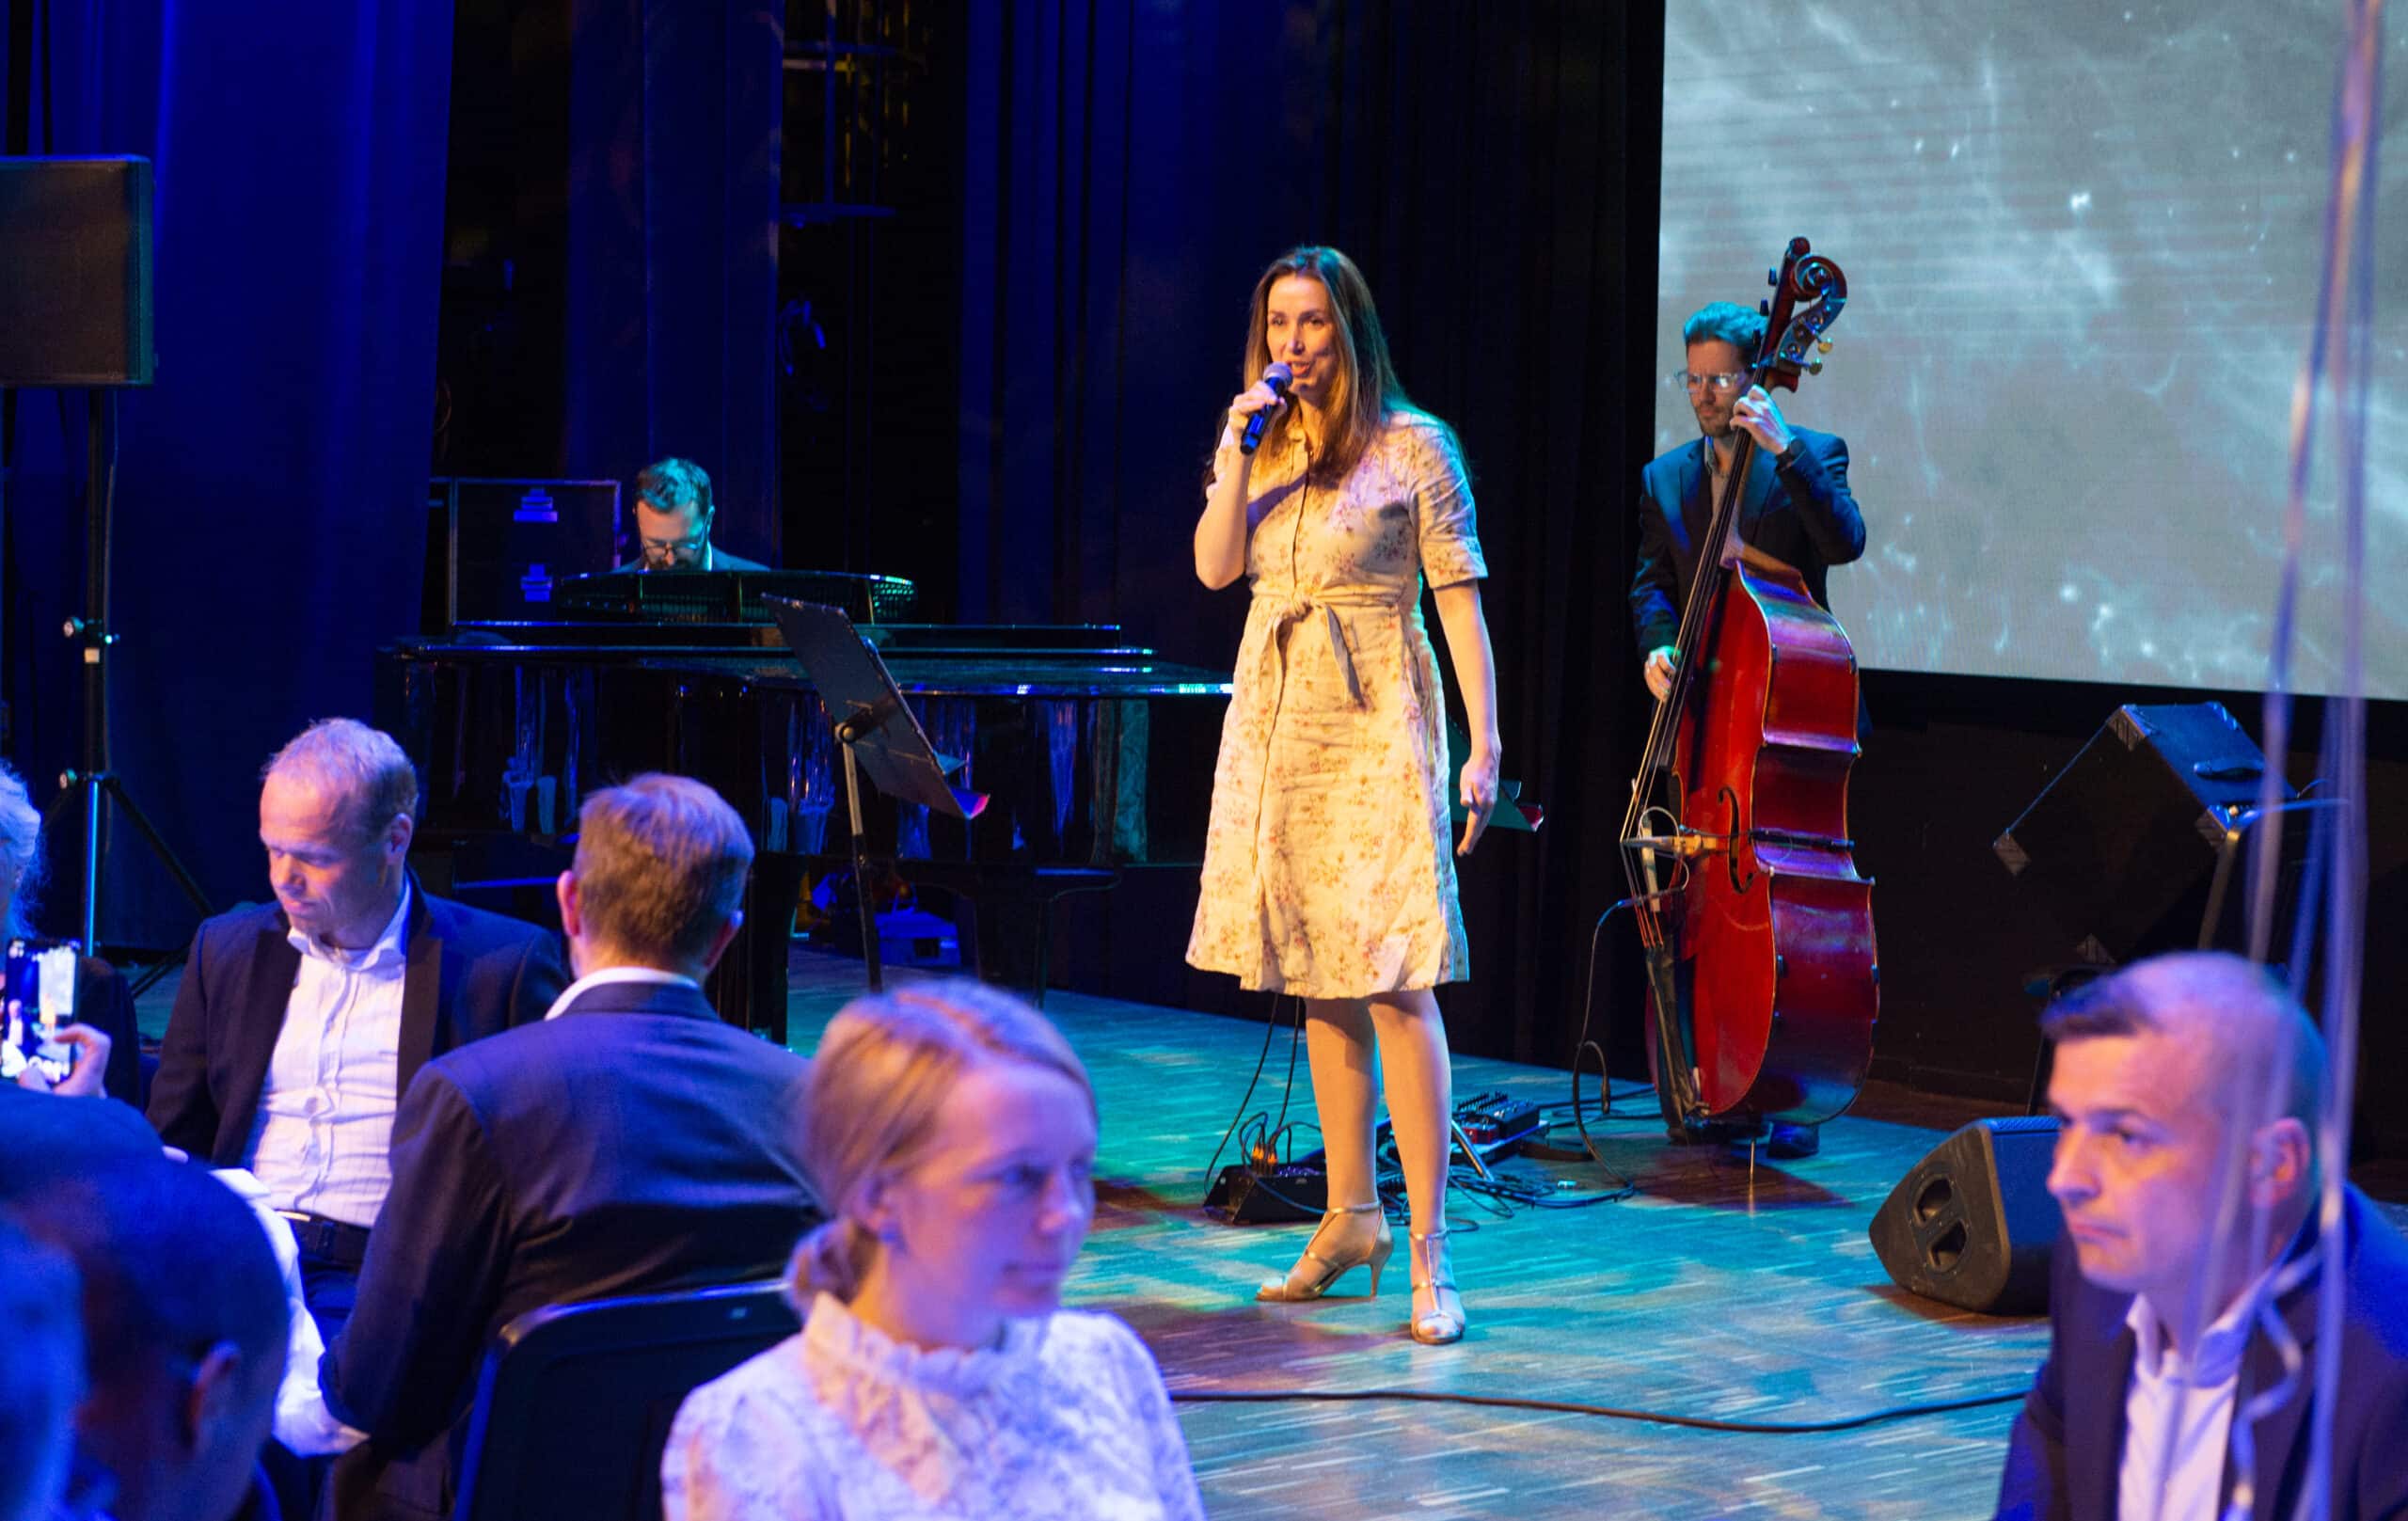 Dina Billington and her band played during the conference dinner. PHOTO: Stein Johnsen, Contentvideo.no